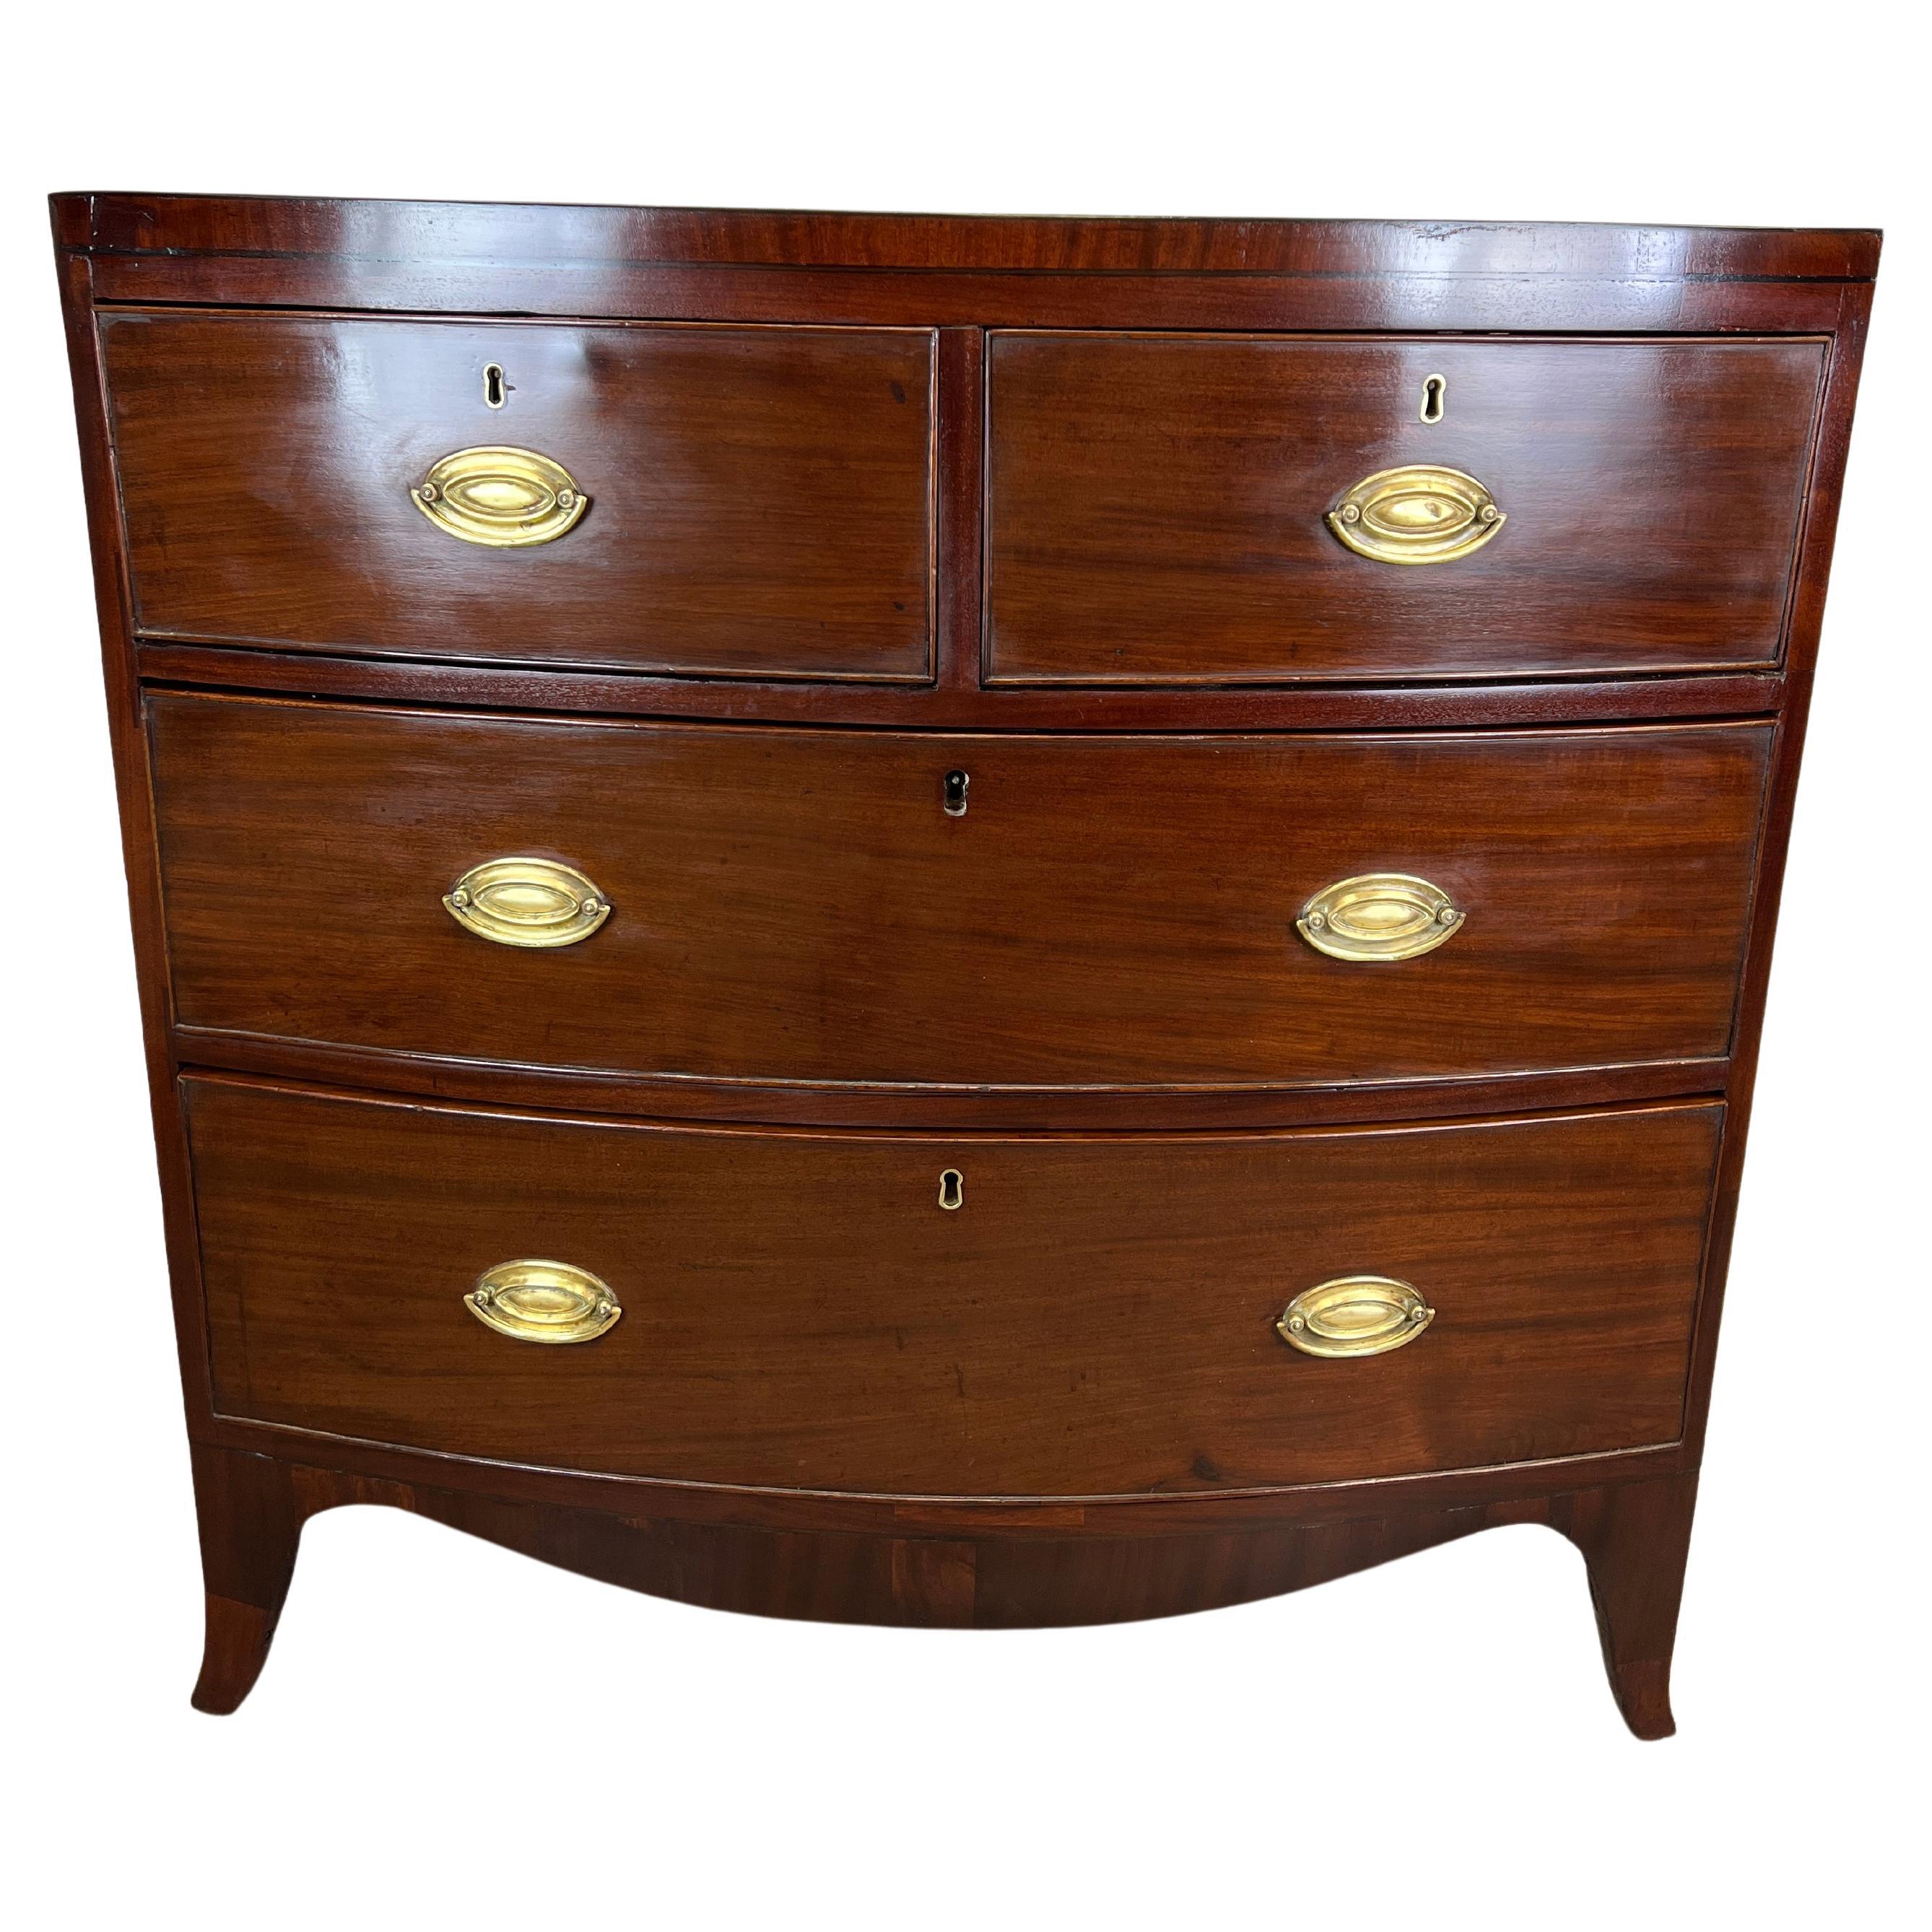 Early 19th Century English Mahogany Bow Front Chest of Drawers